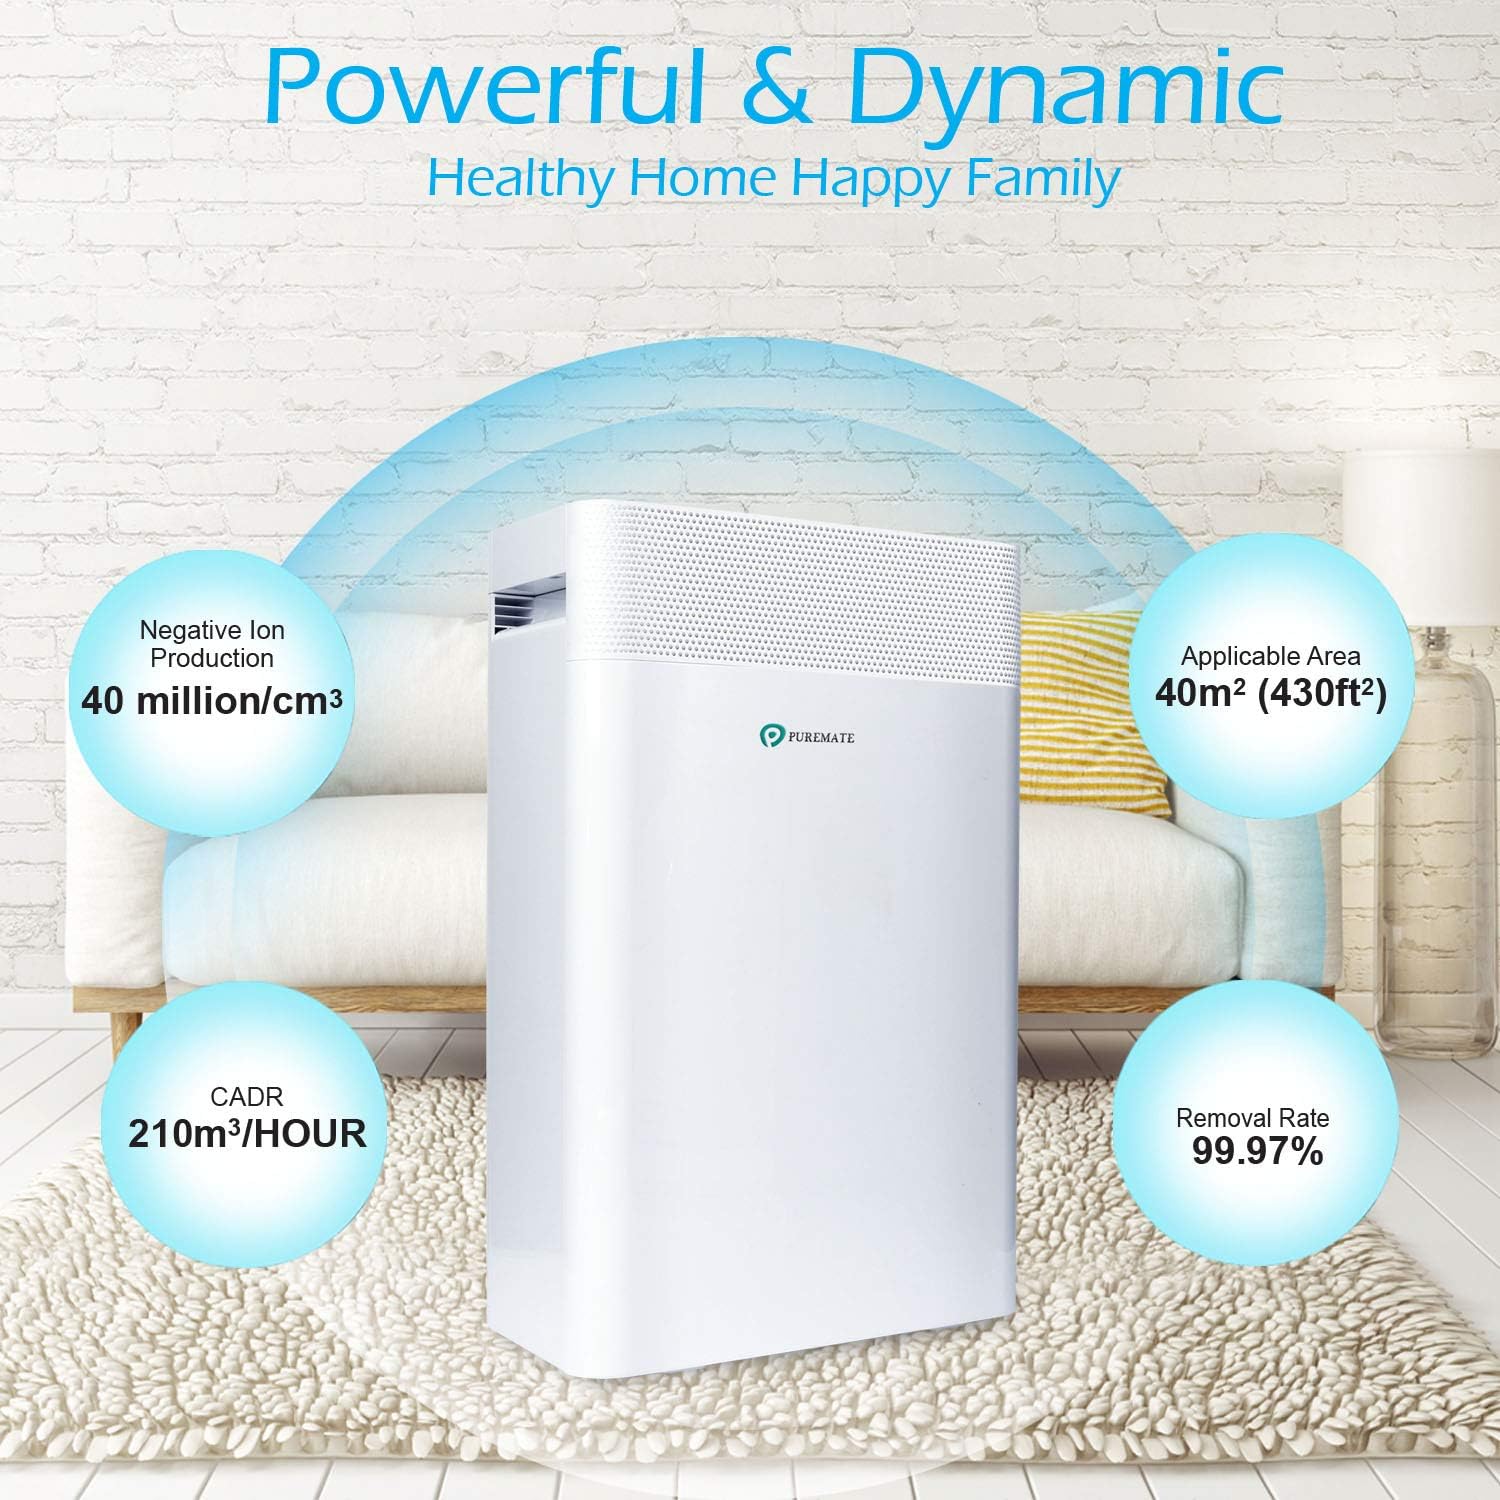 PureMate Air Purifier for Home 5 in1 with Ioniser and Sleep Mode - True HEPA Filter & Active Carbon, Removes Germs & Viruses, Allergies & Asthma, Pollen, Dust, Smokers, Hay Fever, Pets Dander - Amazing Gadgets Outlet